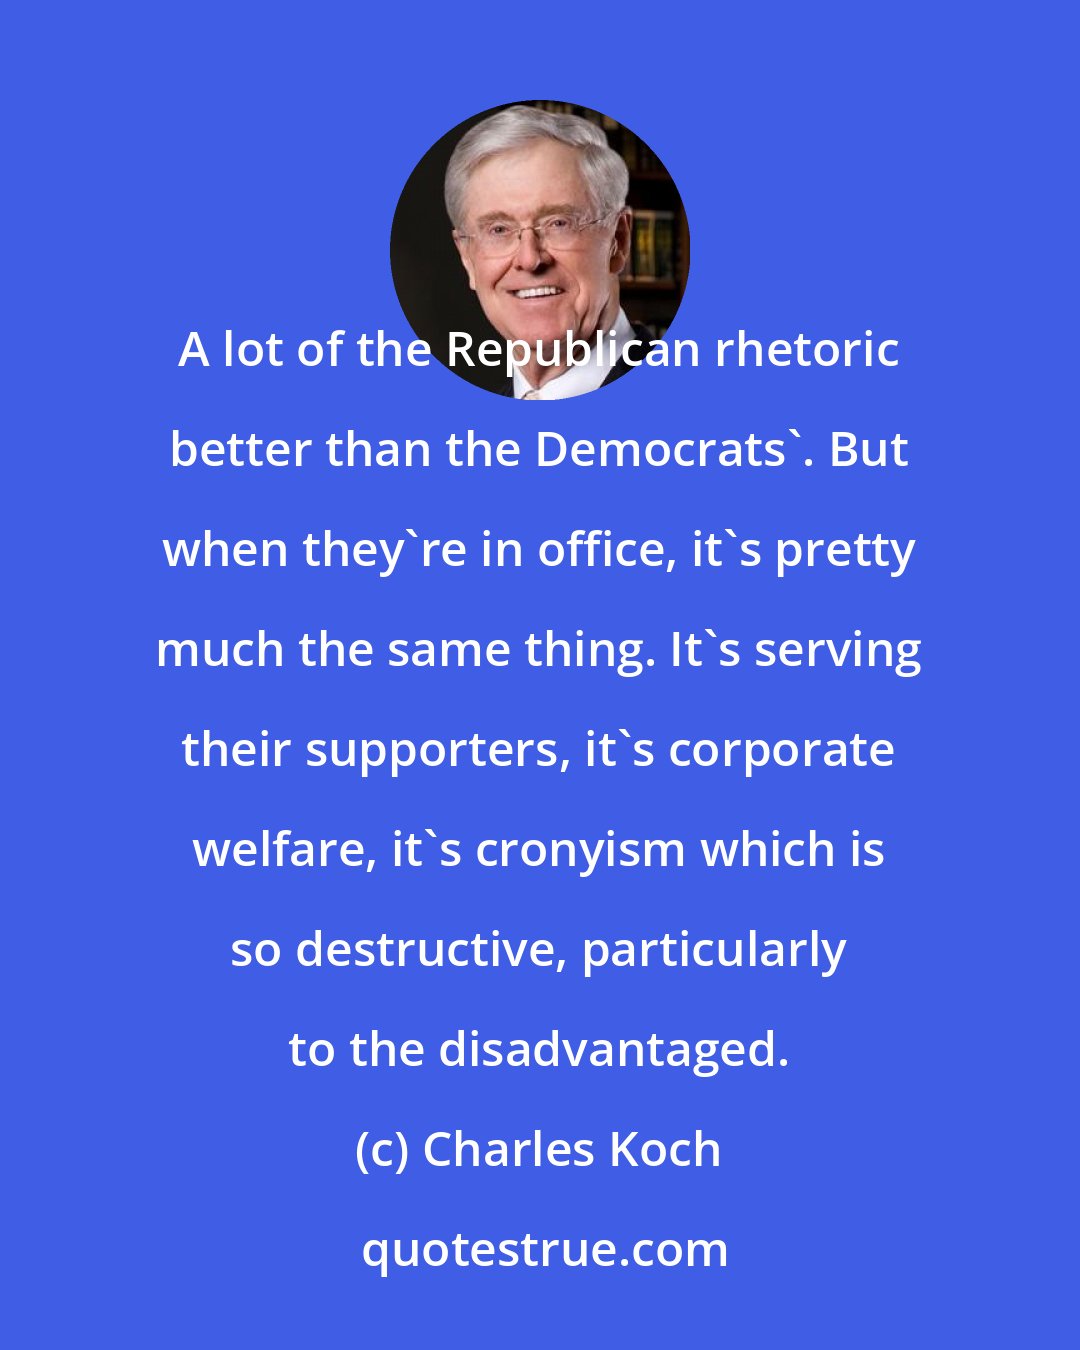 Charles Koch: A lot of the Republican rhetoric better than the Democrats'. But when they're in office, it's pretty much the same thing. It's serving their supporters, it's corporate welfare, it's cronyism which is so destructive, particularly to the disadvantaged.